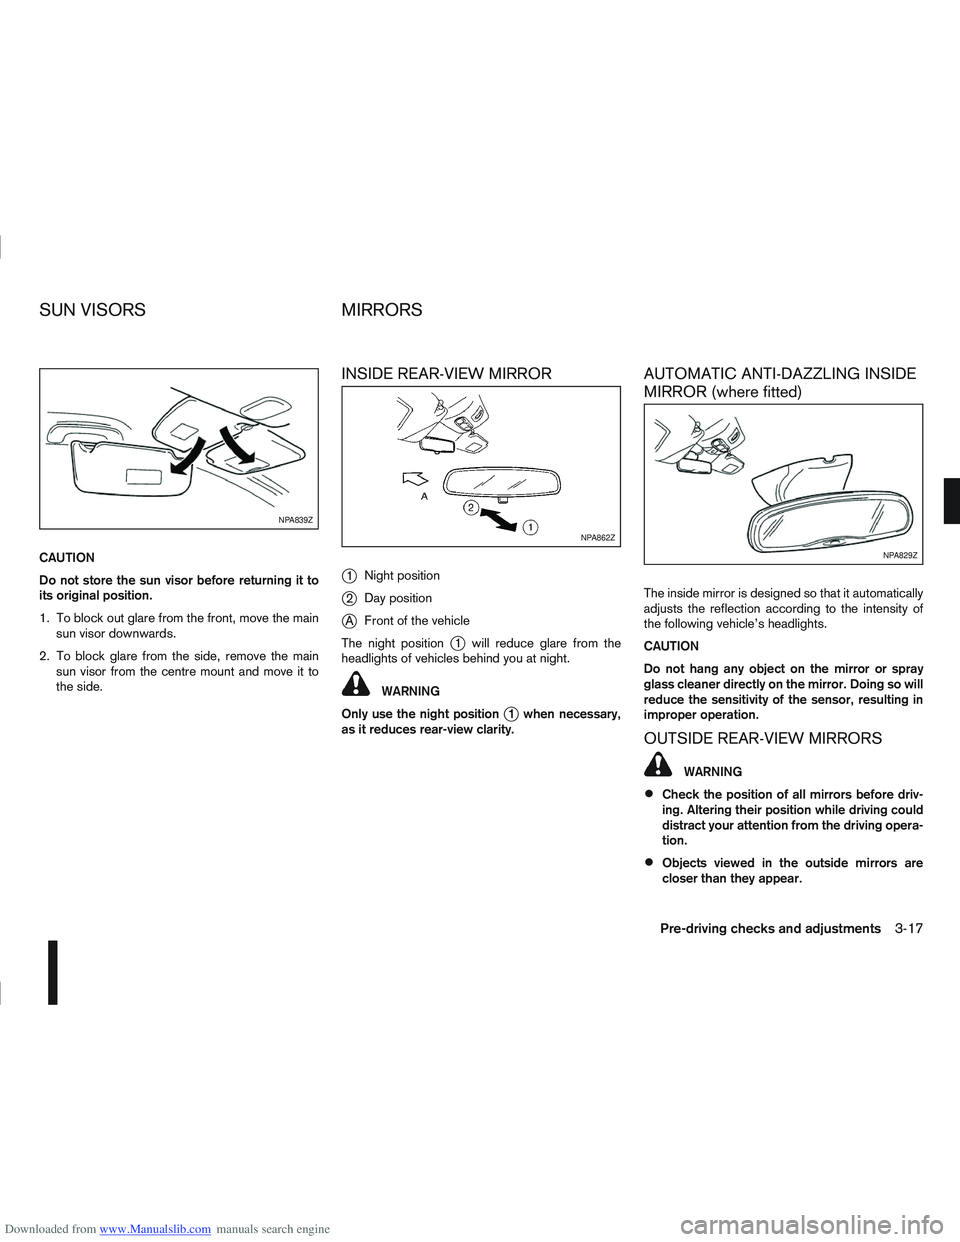 NISSAN QASHQAI 2013  Owners Manual Downloaded from www.Manualslib.com manuals search engine CAUTION
Do not store the sun visor before returning it to
its original position.
1. To block out glare from the front, move the mainsun visor d